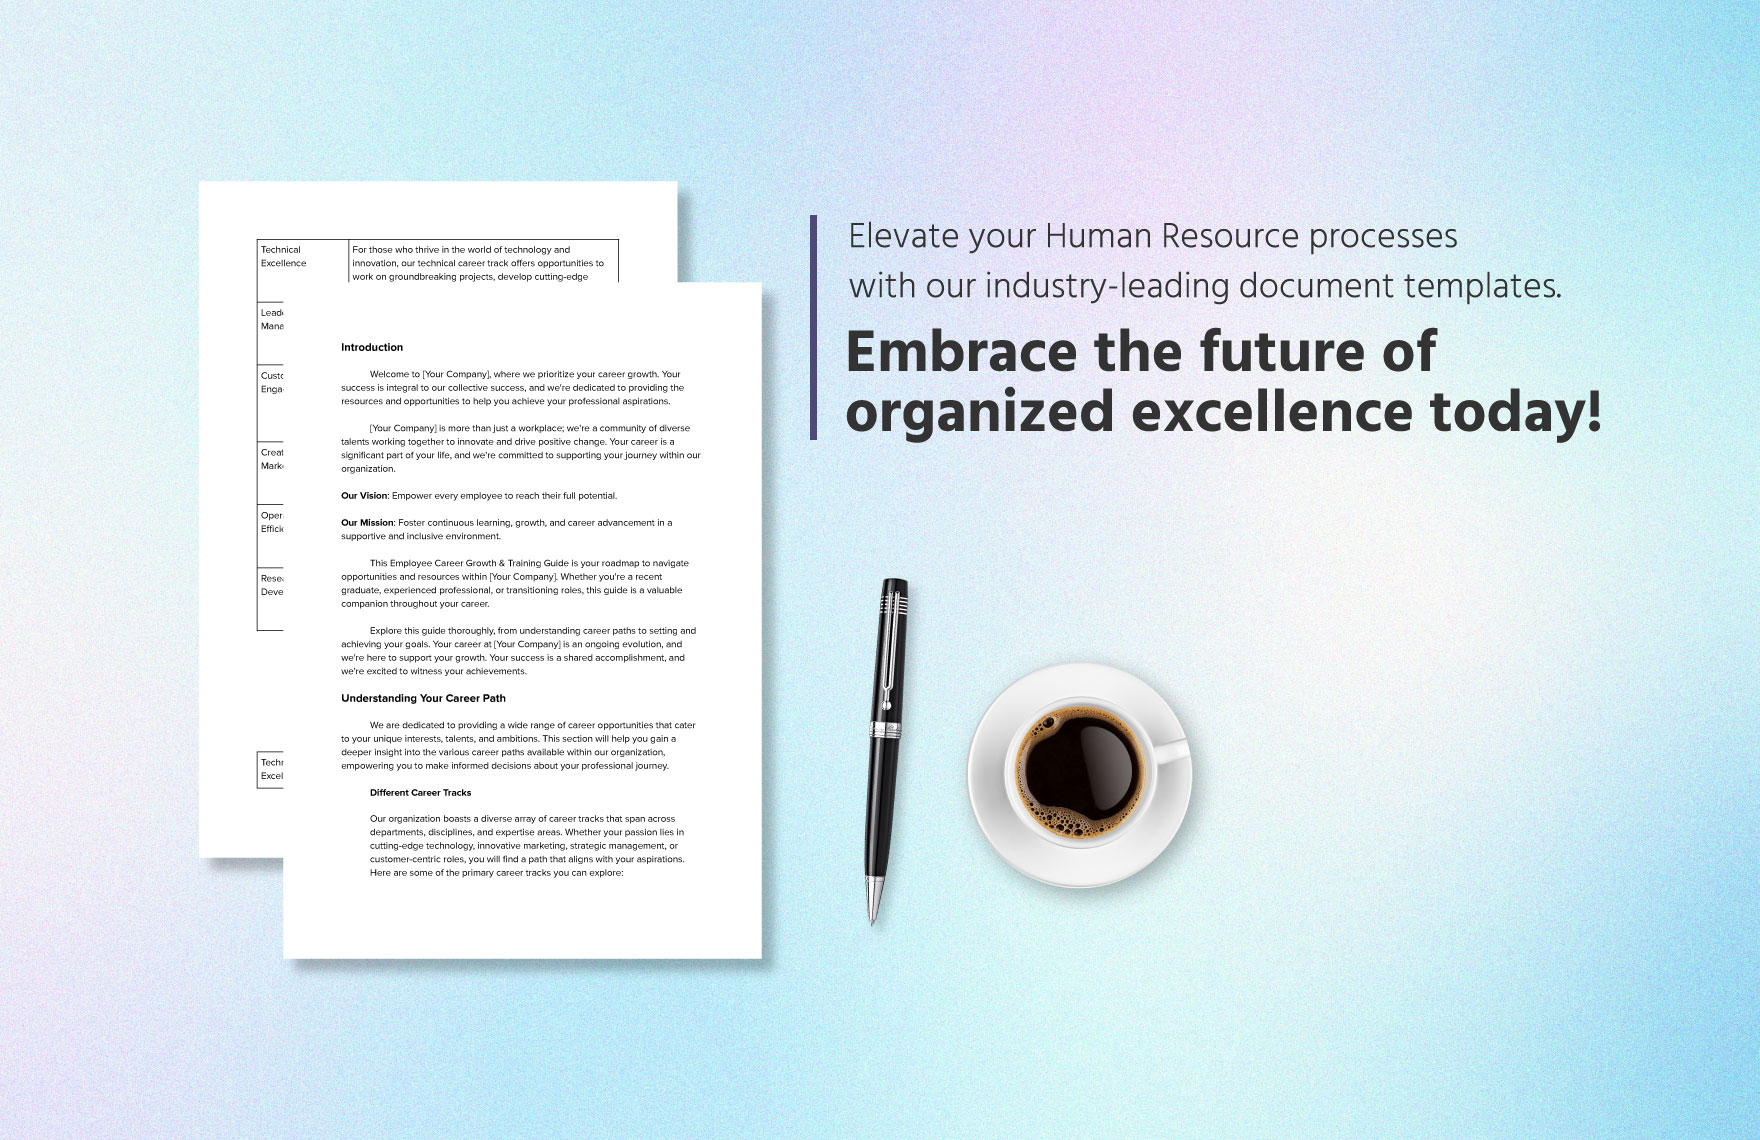 Employee Career Growth & Training Guide HR Template